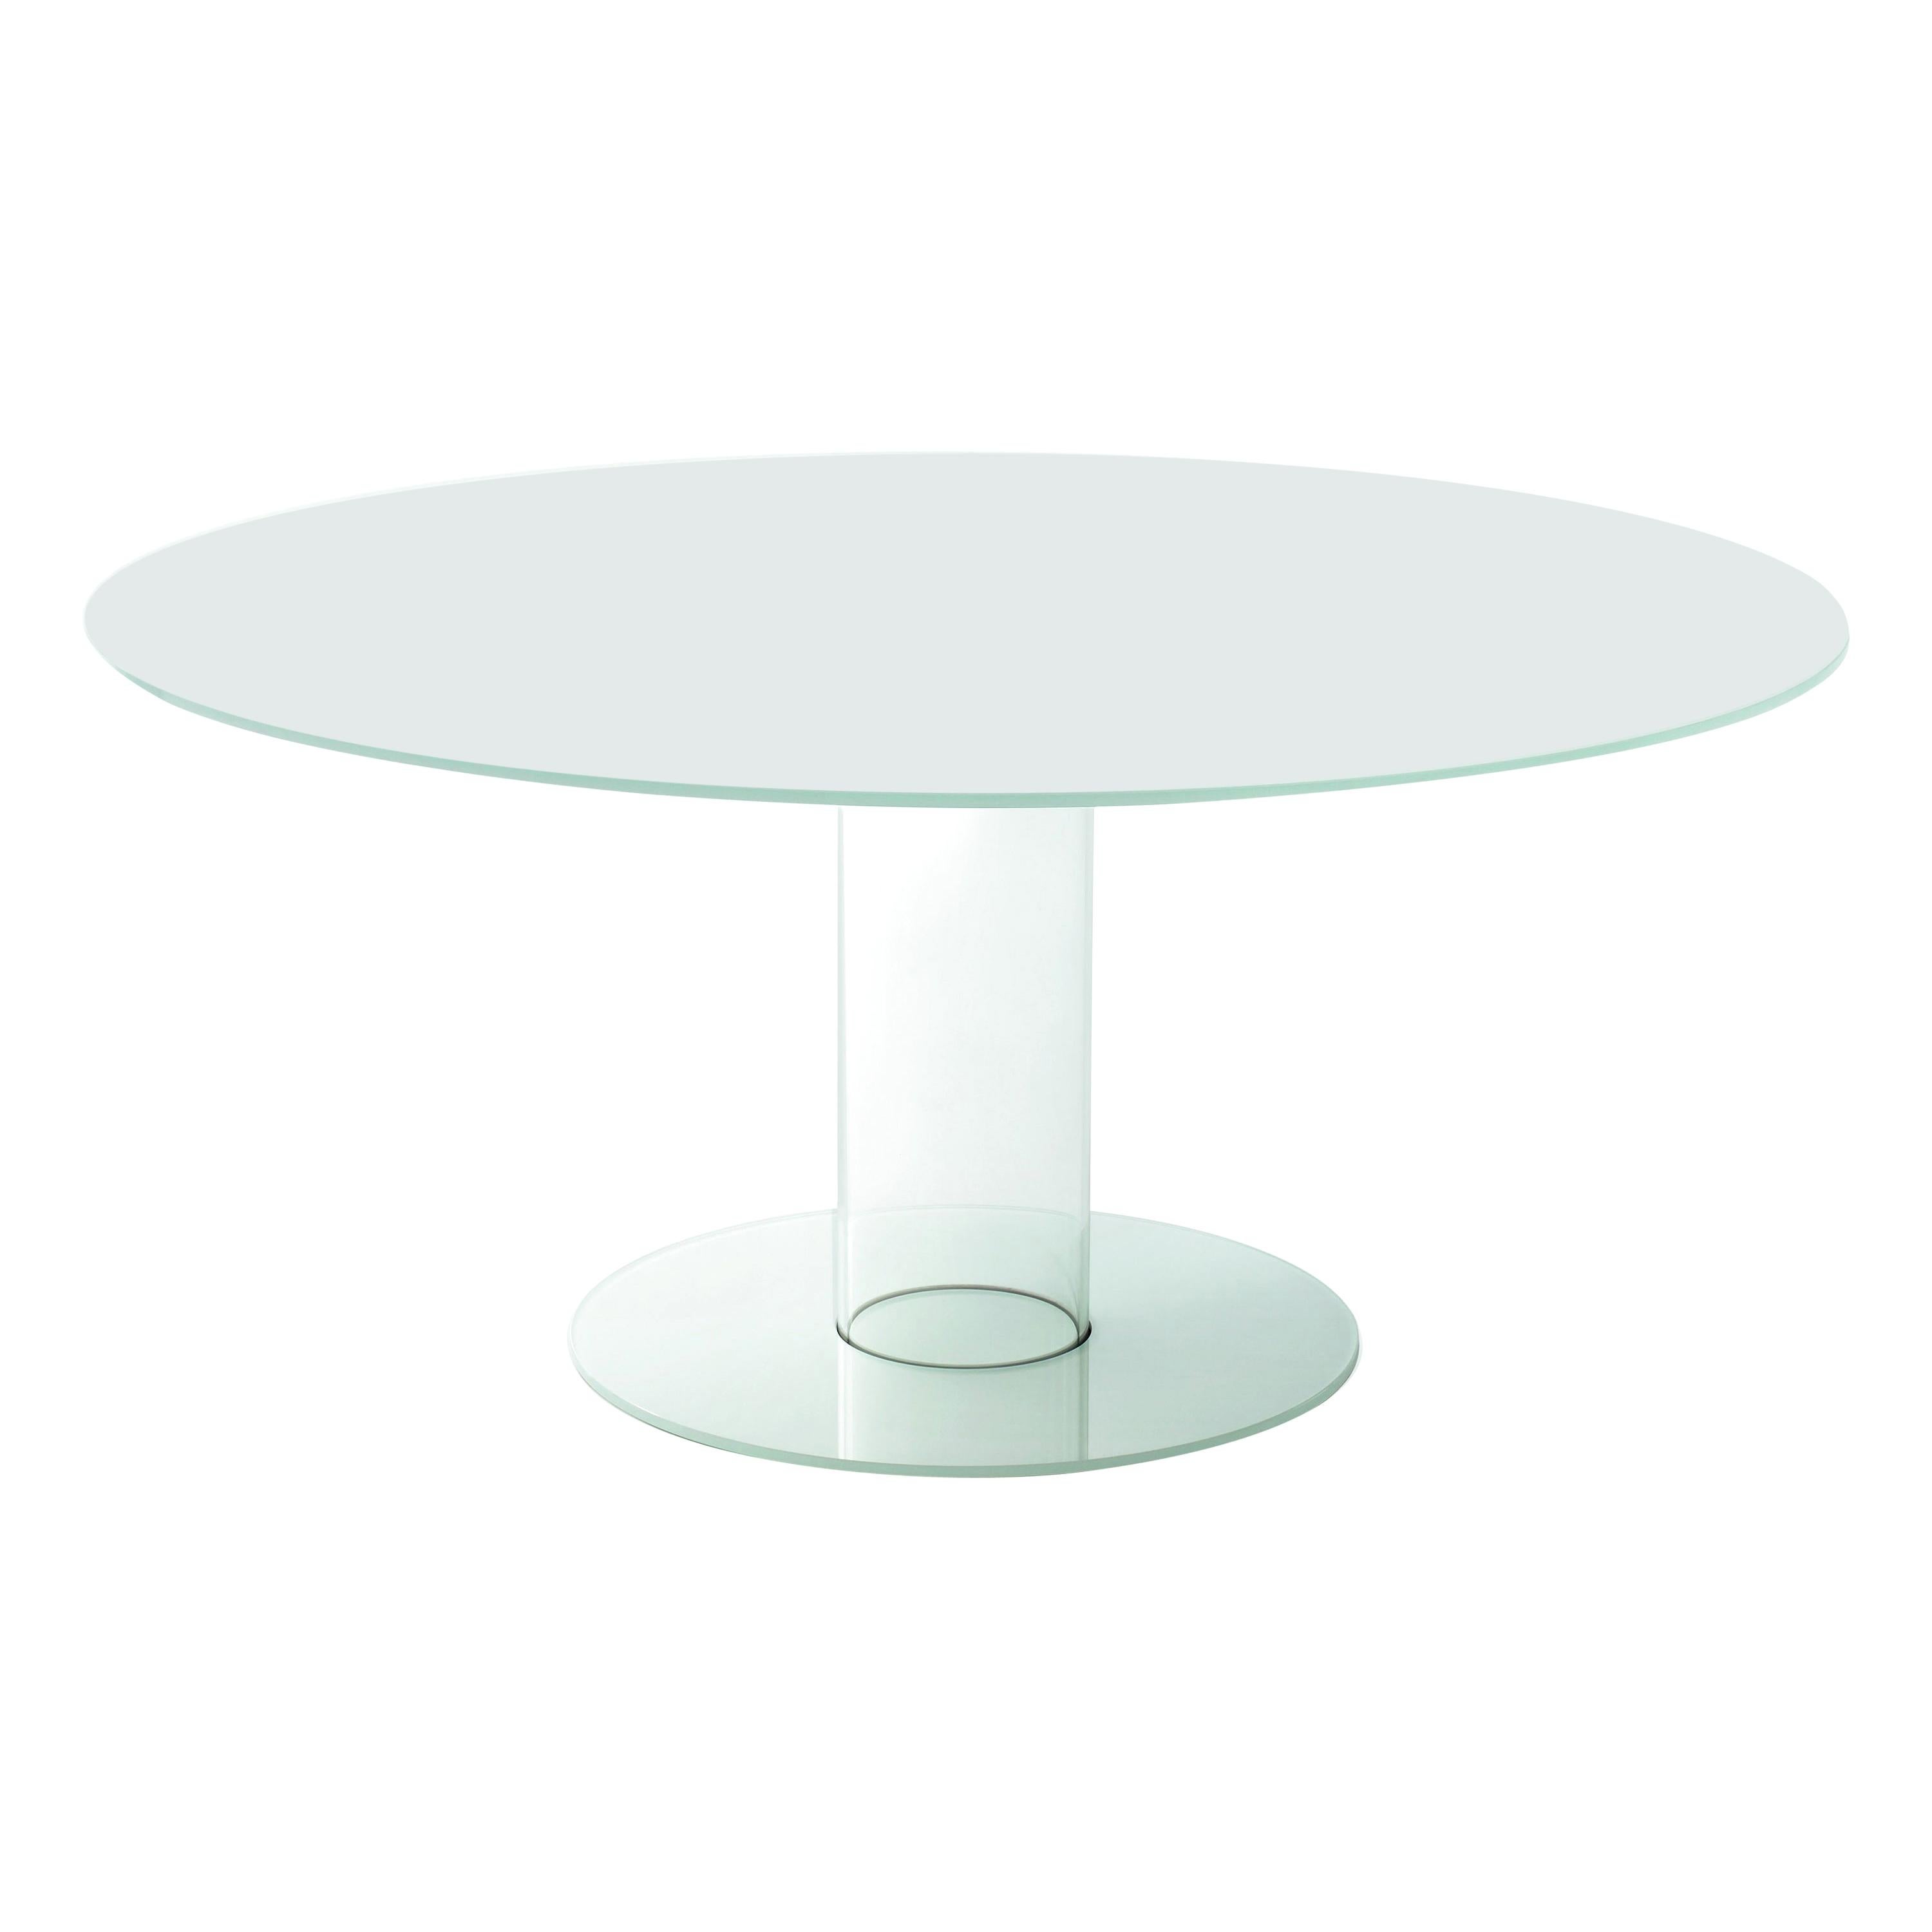 HUB High Table D 150cm in White Glossy Glass, by Piero Lissoni for Glas Italia